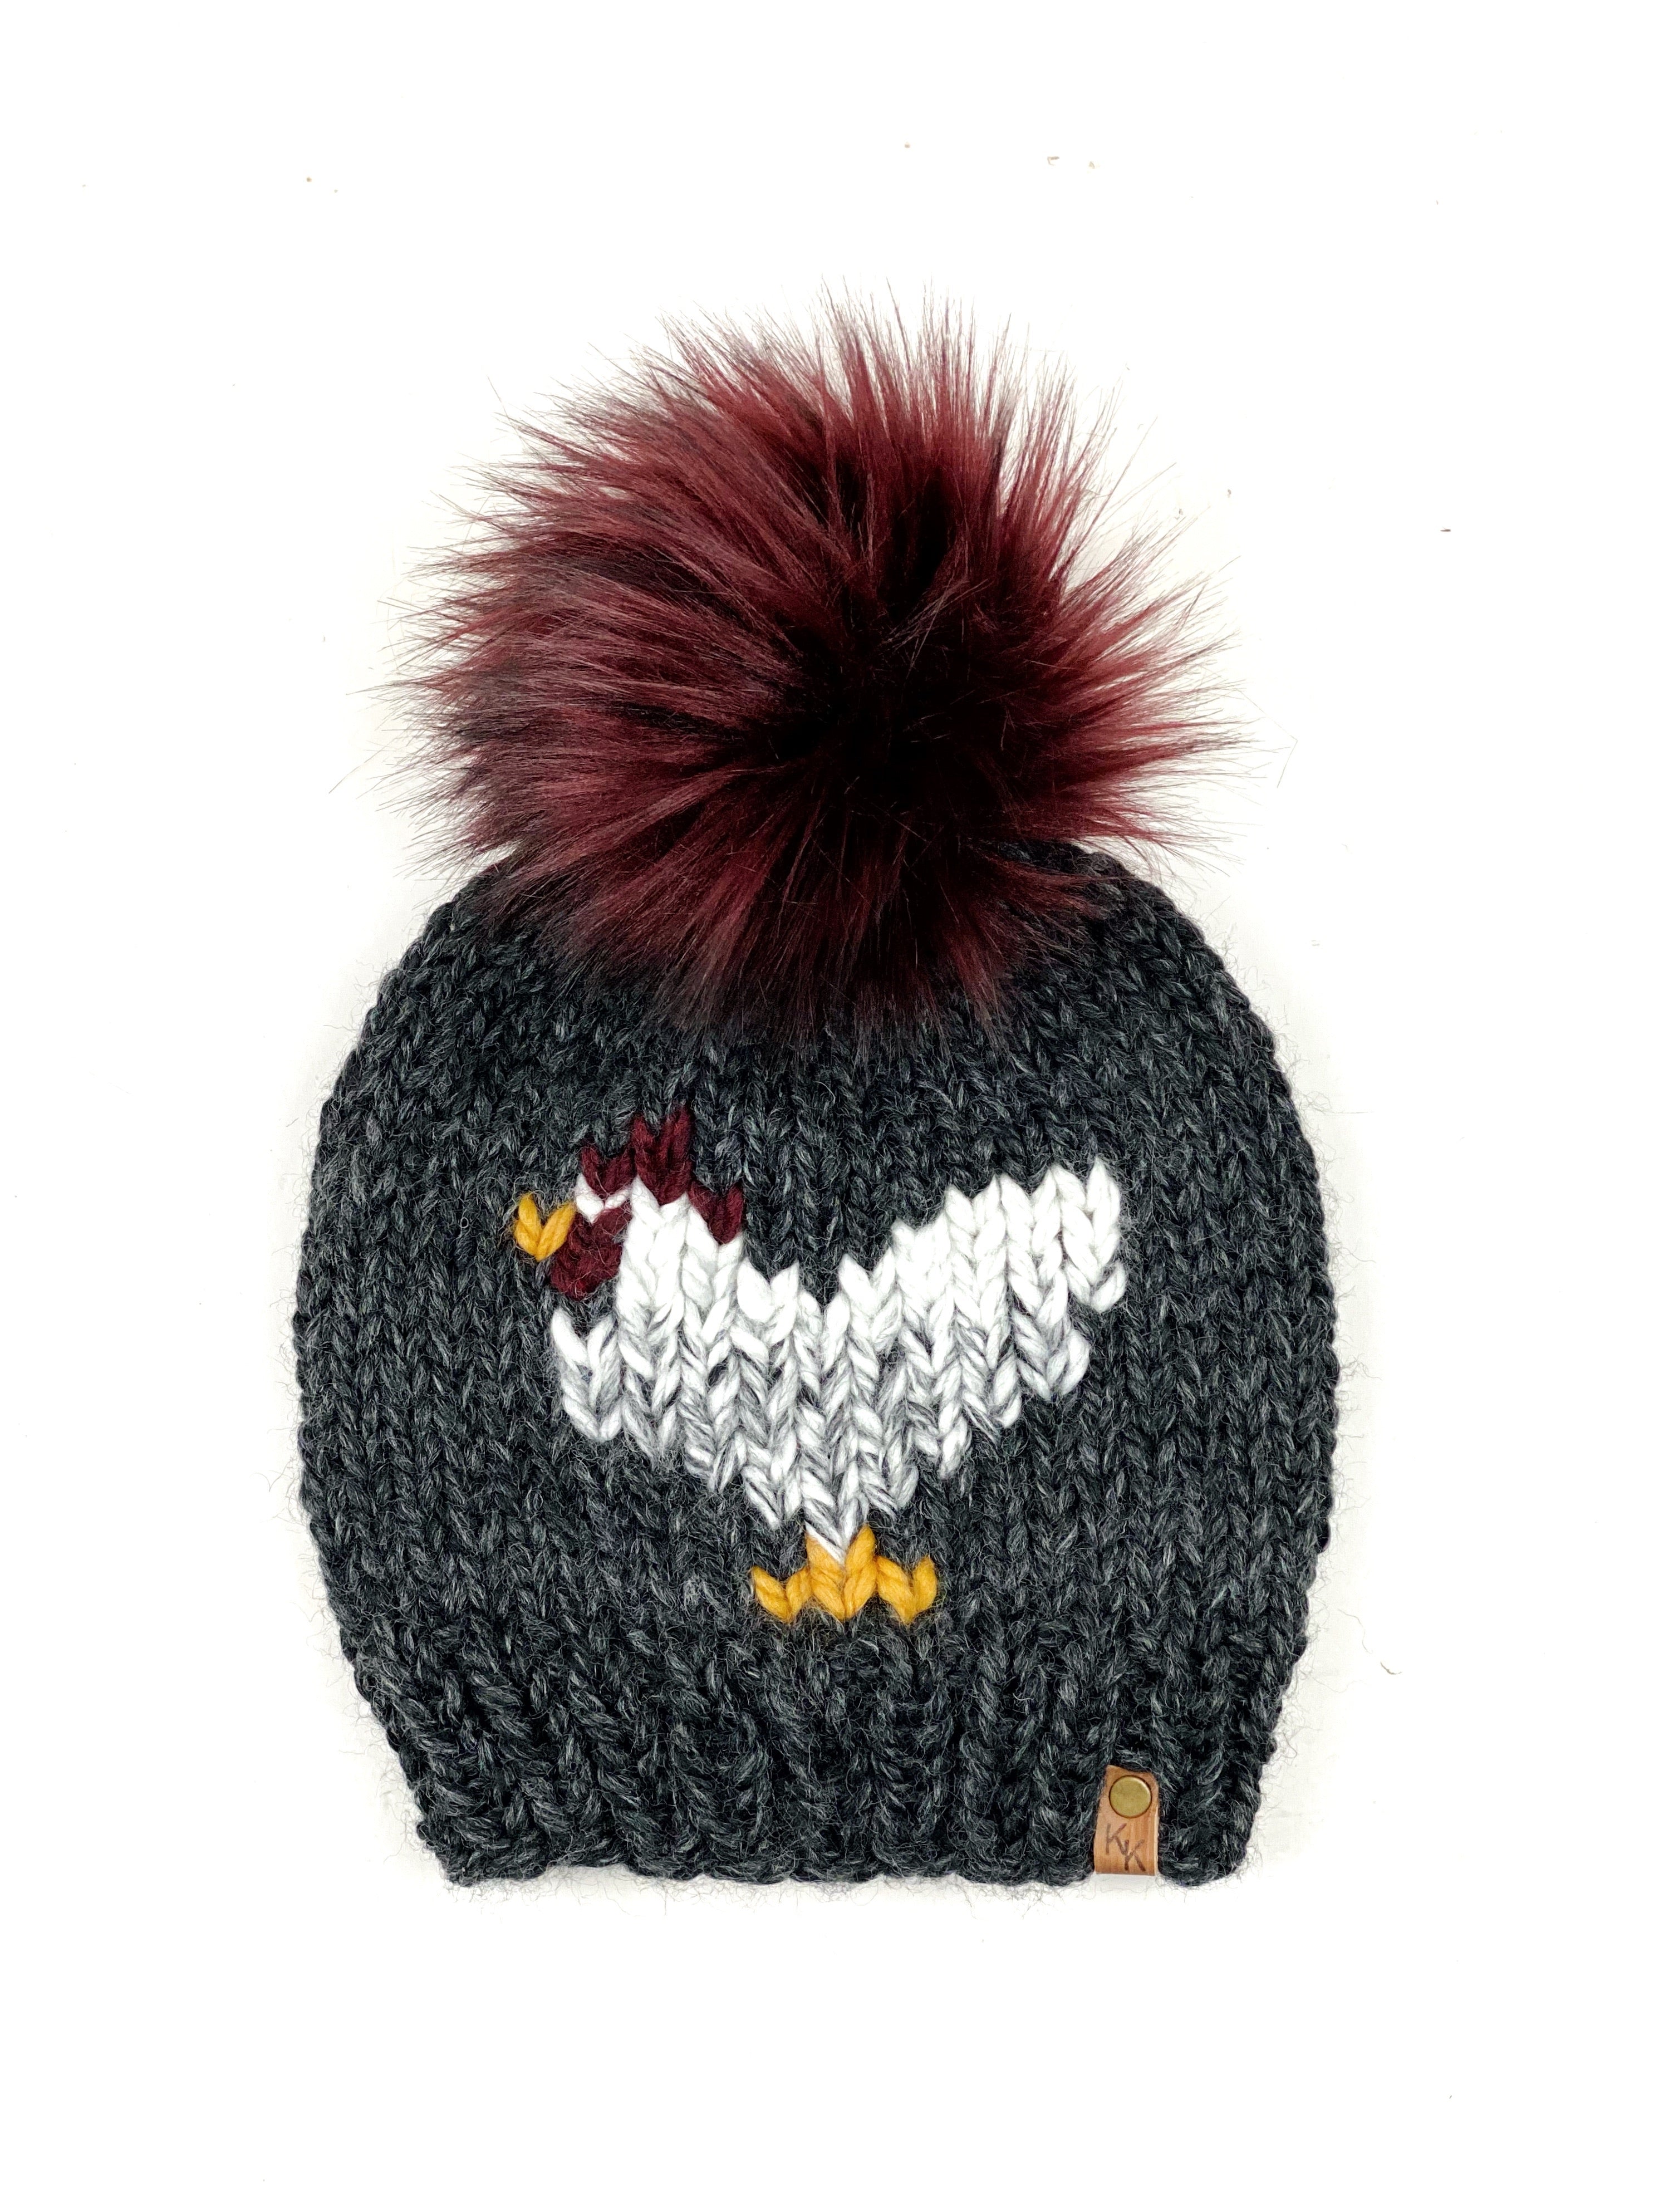 Chicken Hat Charcoal Marble Beanie Wool Blend Womens Adult Hat Faux Fur Pom Pom Hat